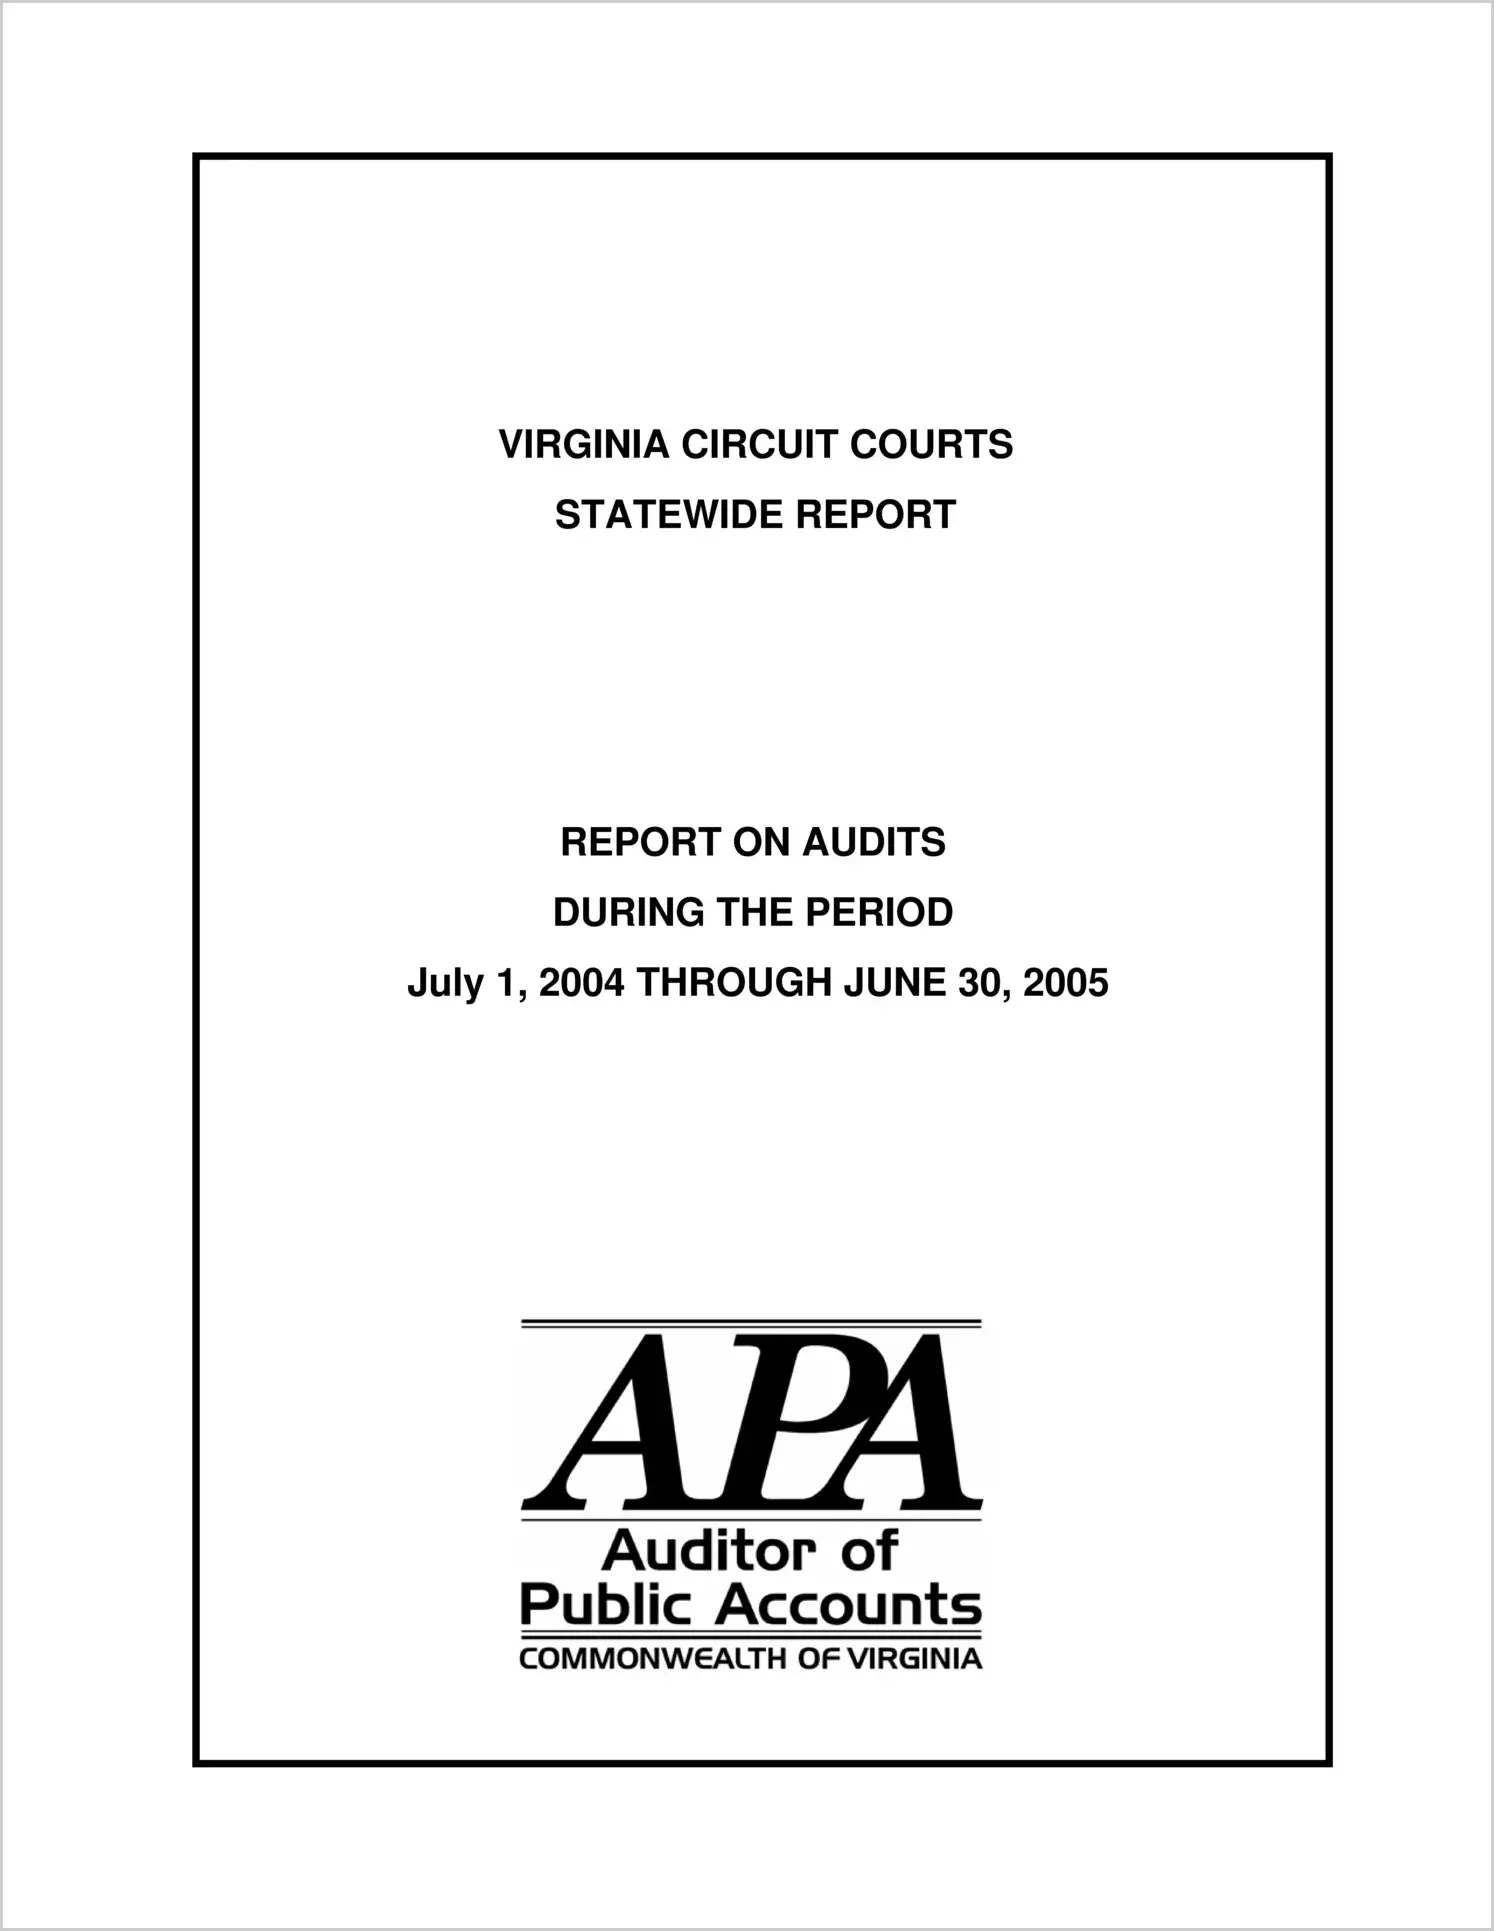 Virginia Circuit Courts Statewide Report during the period July 1, 2004 through June 30, 2005